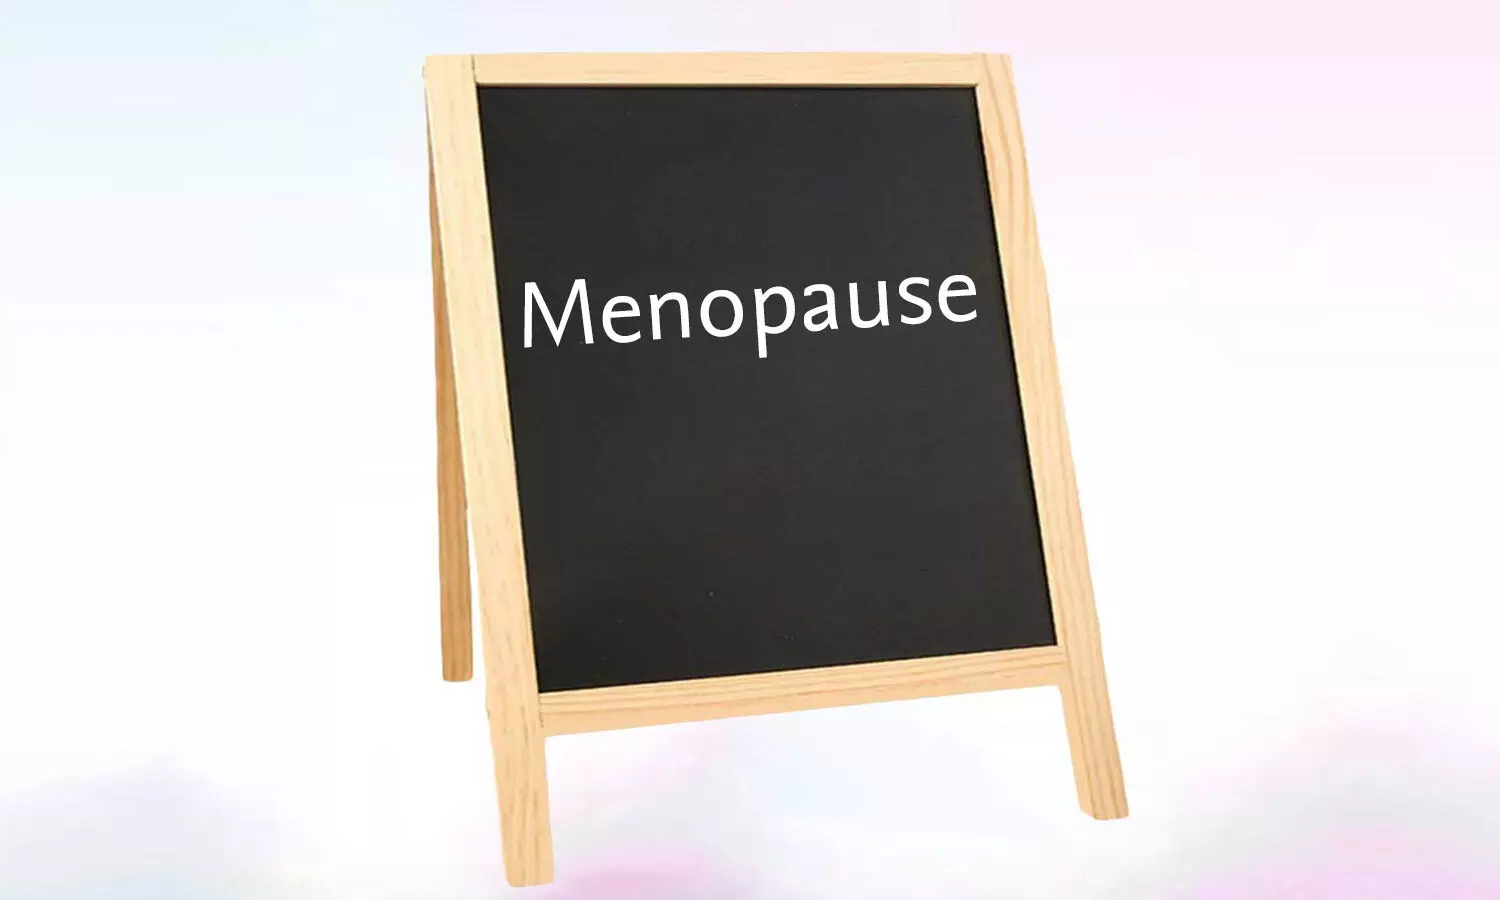 CO2 Laser Therapy does not improve Genitourinary Syndrome of Menopause,finds study